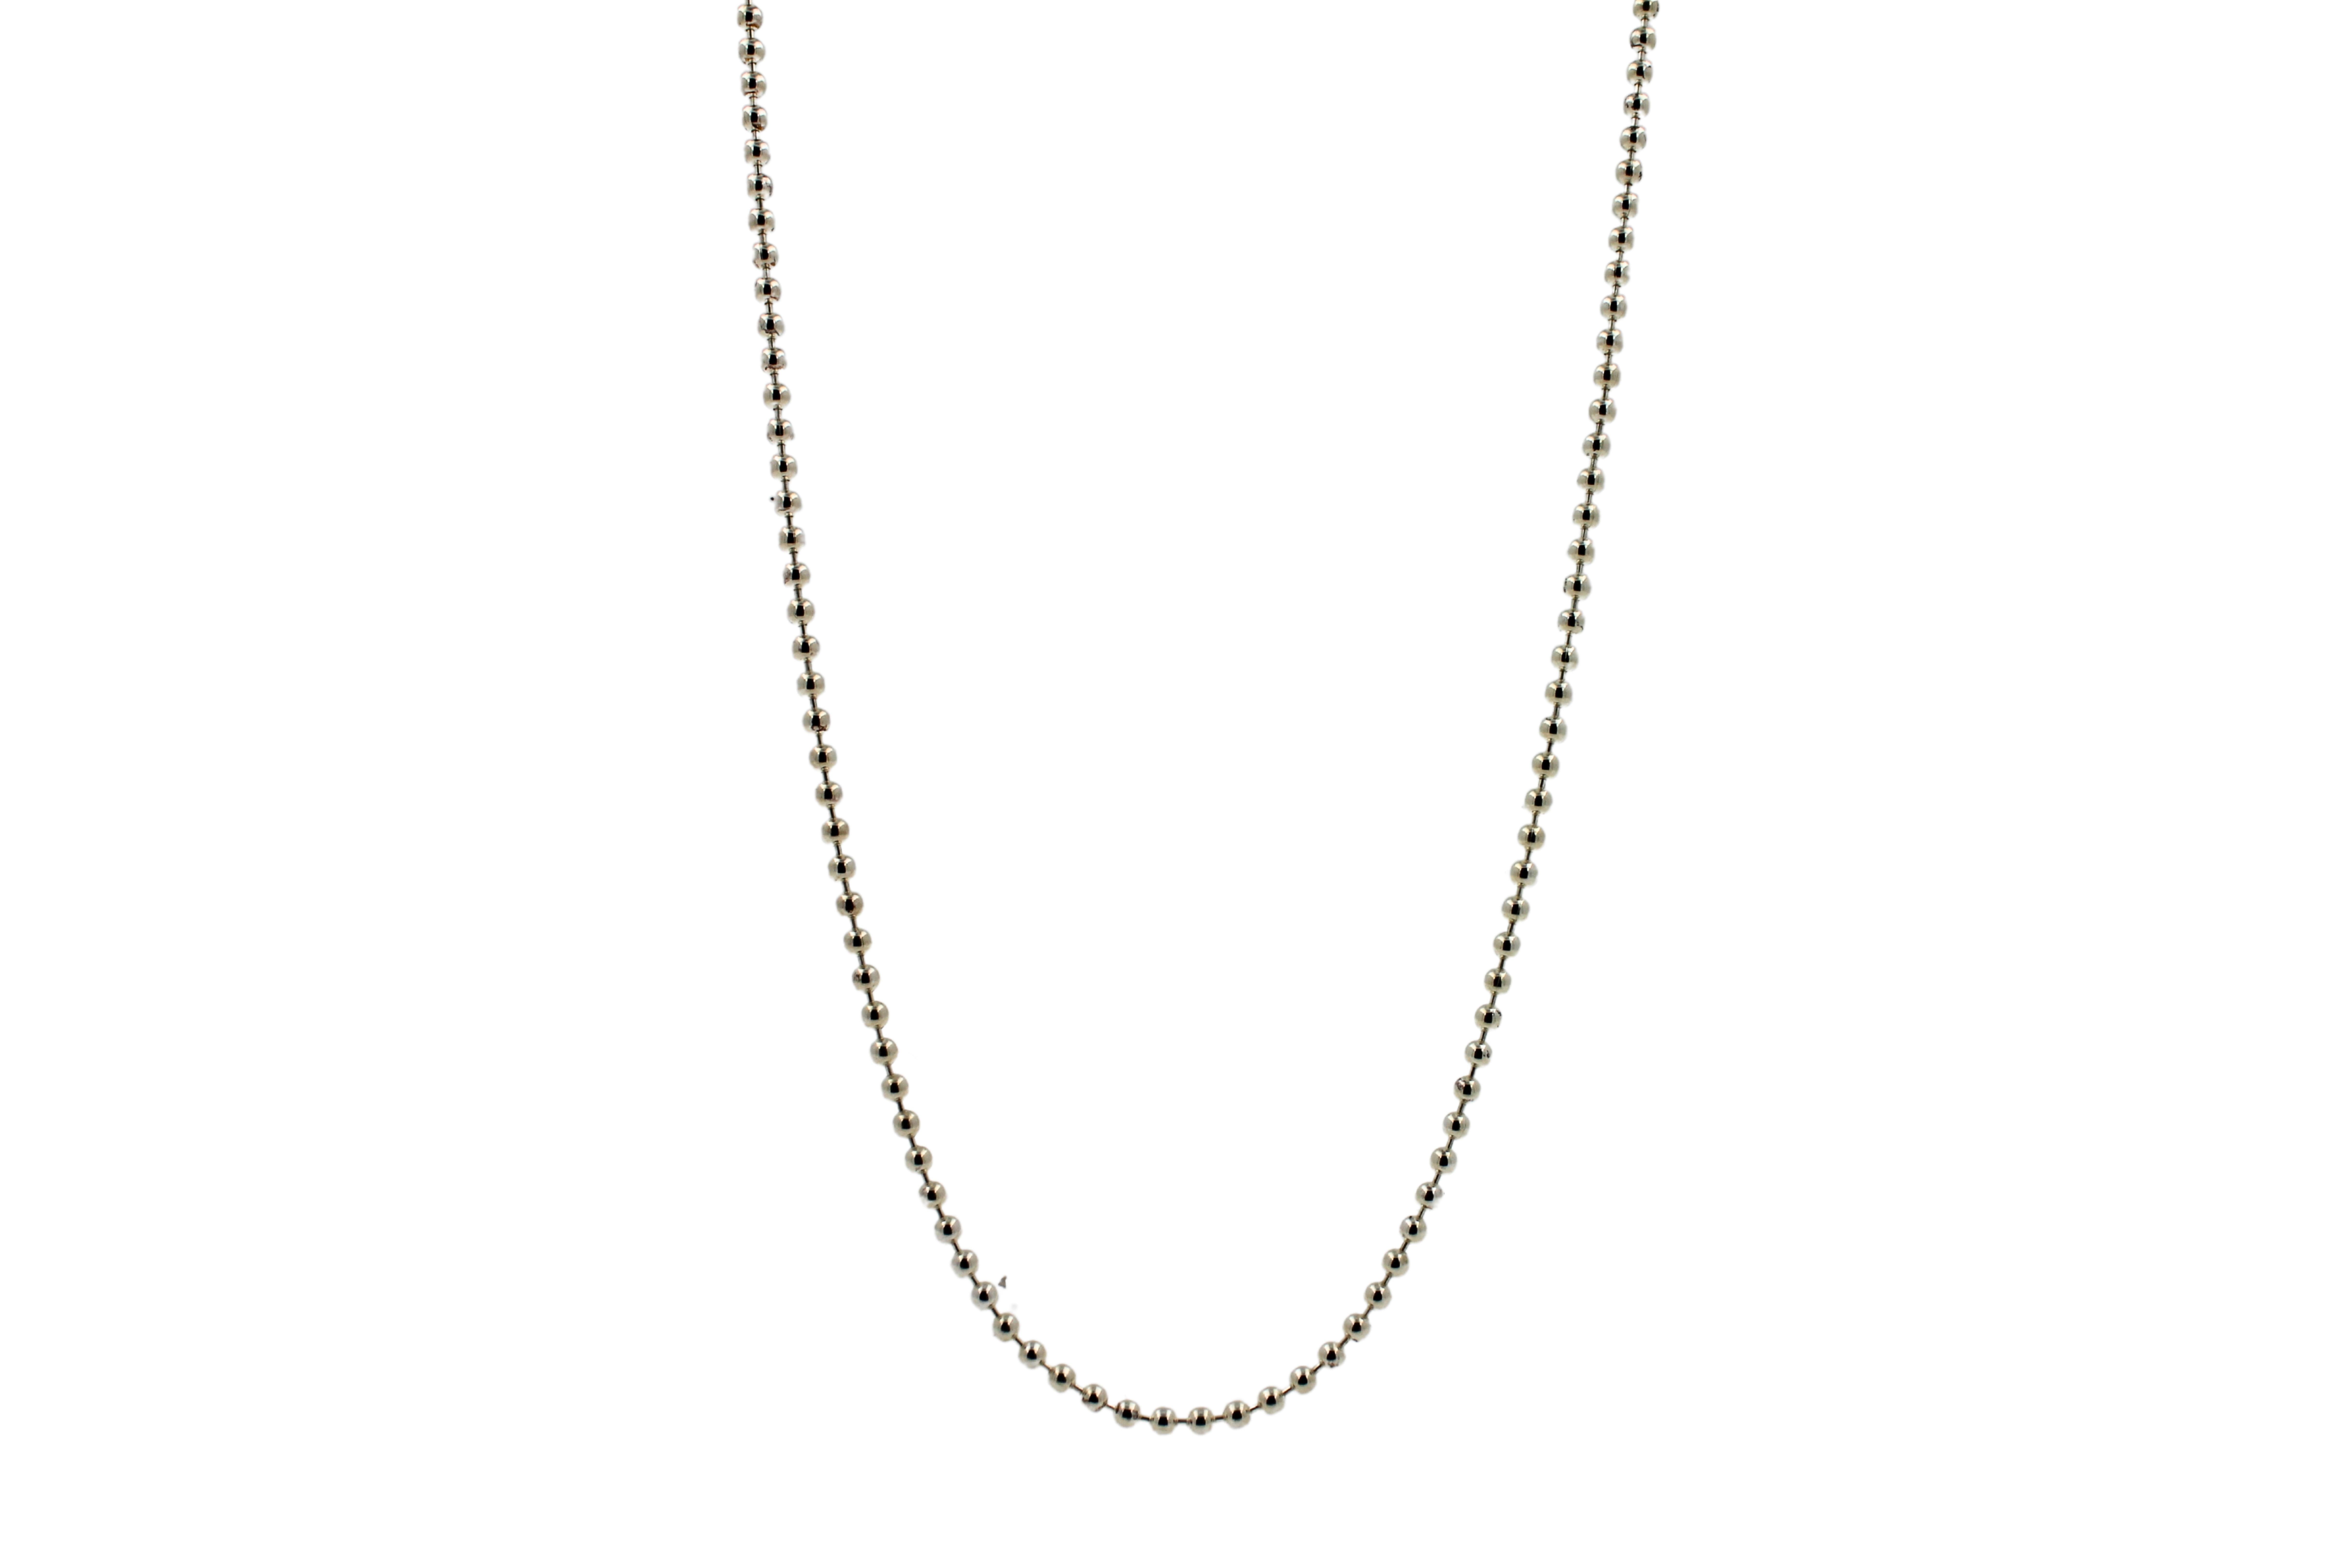 Small Ball Bead Beaded Fancy Dainty Link 925 Sterling Silver Chain Necklace
•	24 inches length
•	6.3 grams 
•	1.2 mm width
•	White Rhodium Plate Finish
